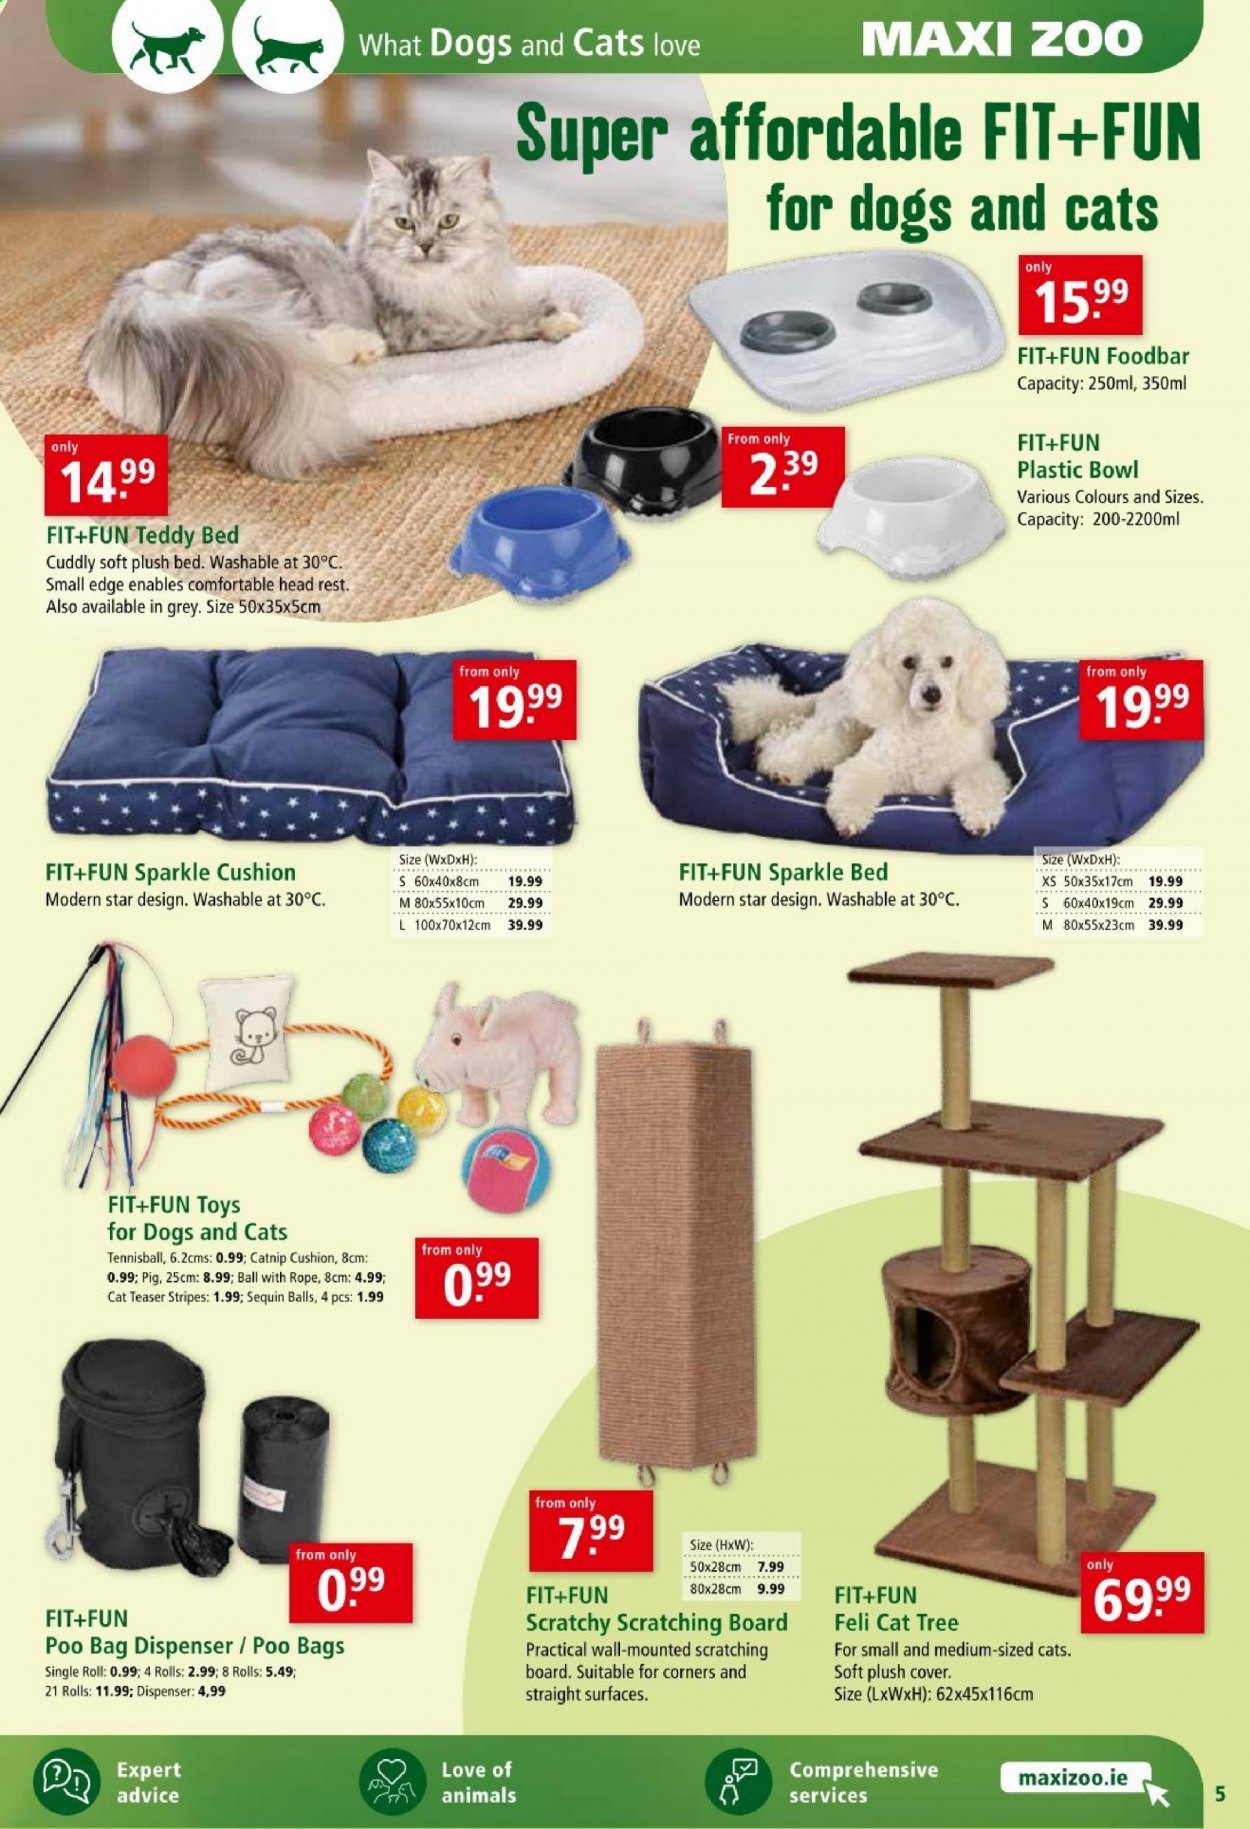 thumbnail - Maxi Zoo offer  - 15.01.2021 - 24.01.2021 - Sales products - cushion, pet bed, cat toy, dog toy, bowl, cat scratcher, foodbar, poo bag, cat tree, FIT+FUN. Page 5.